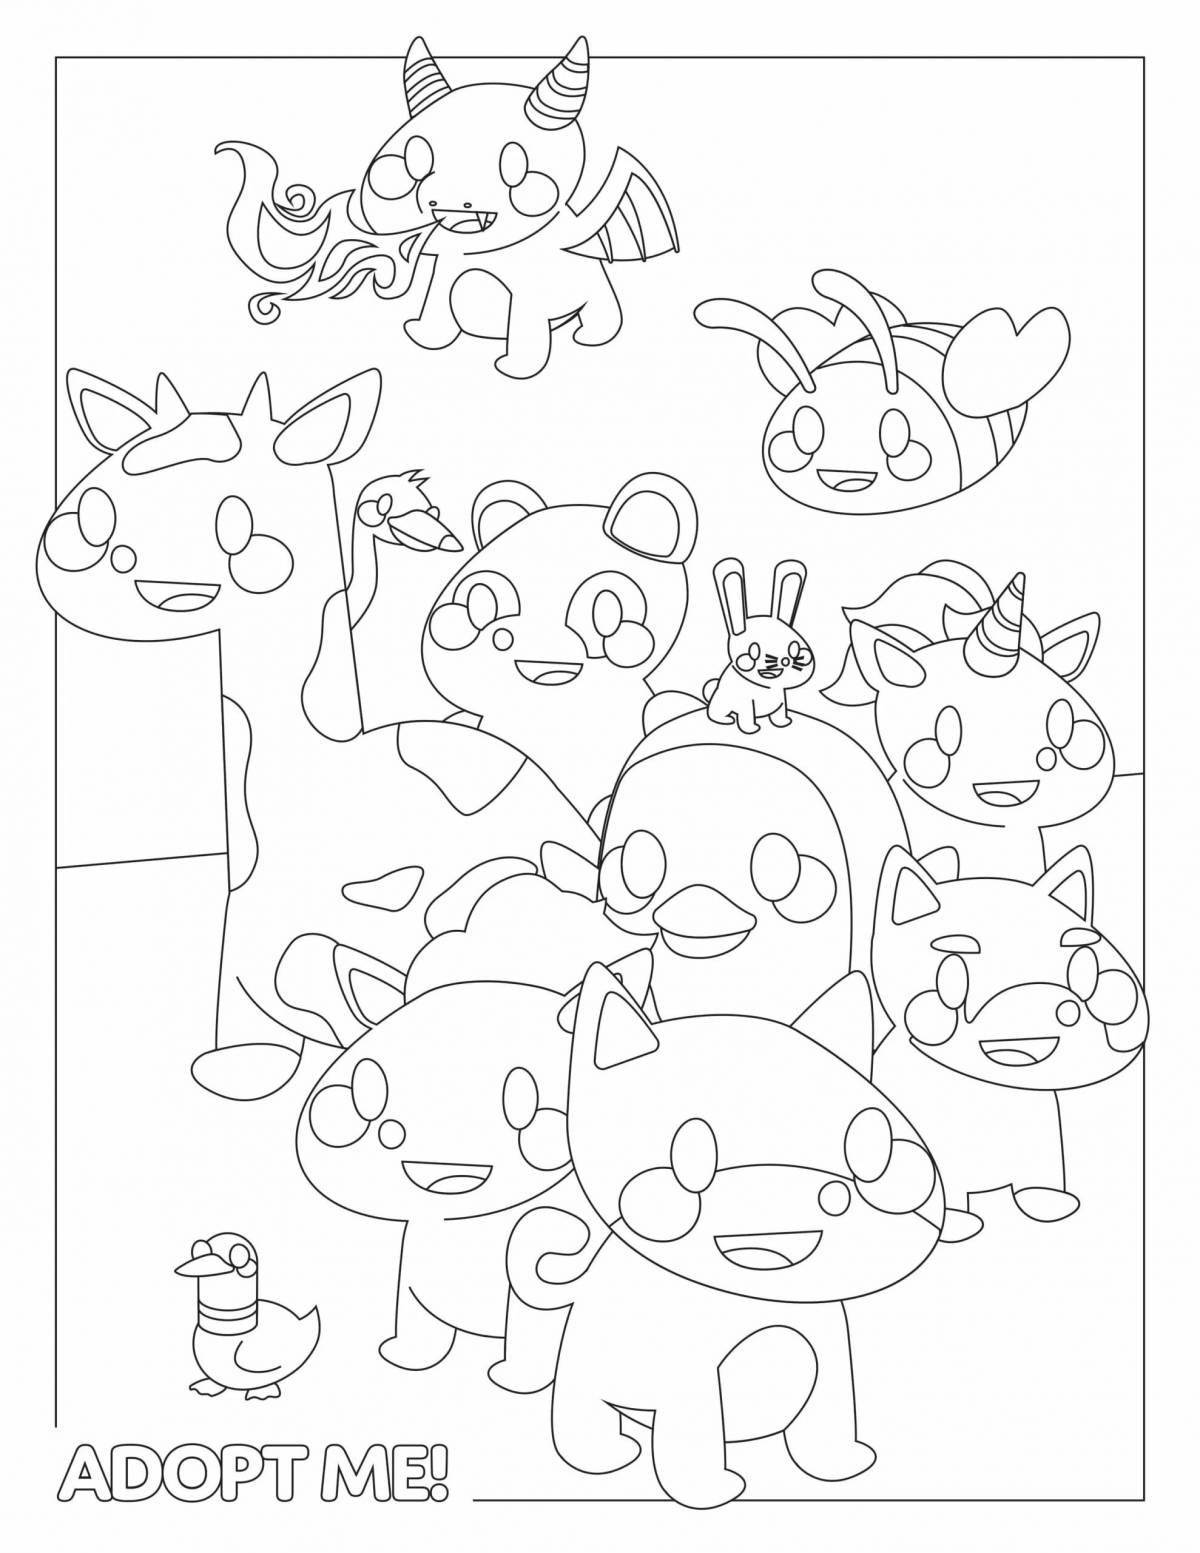 Charming cow coloring page